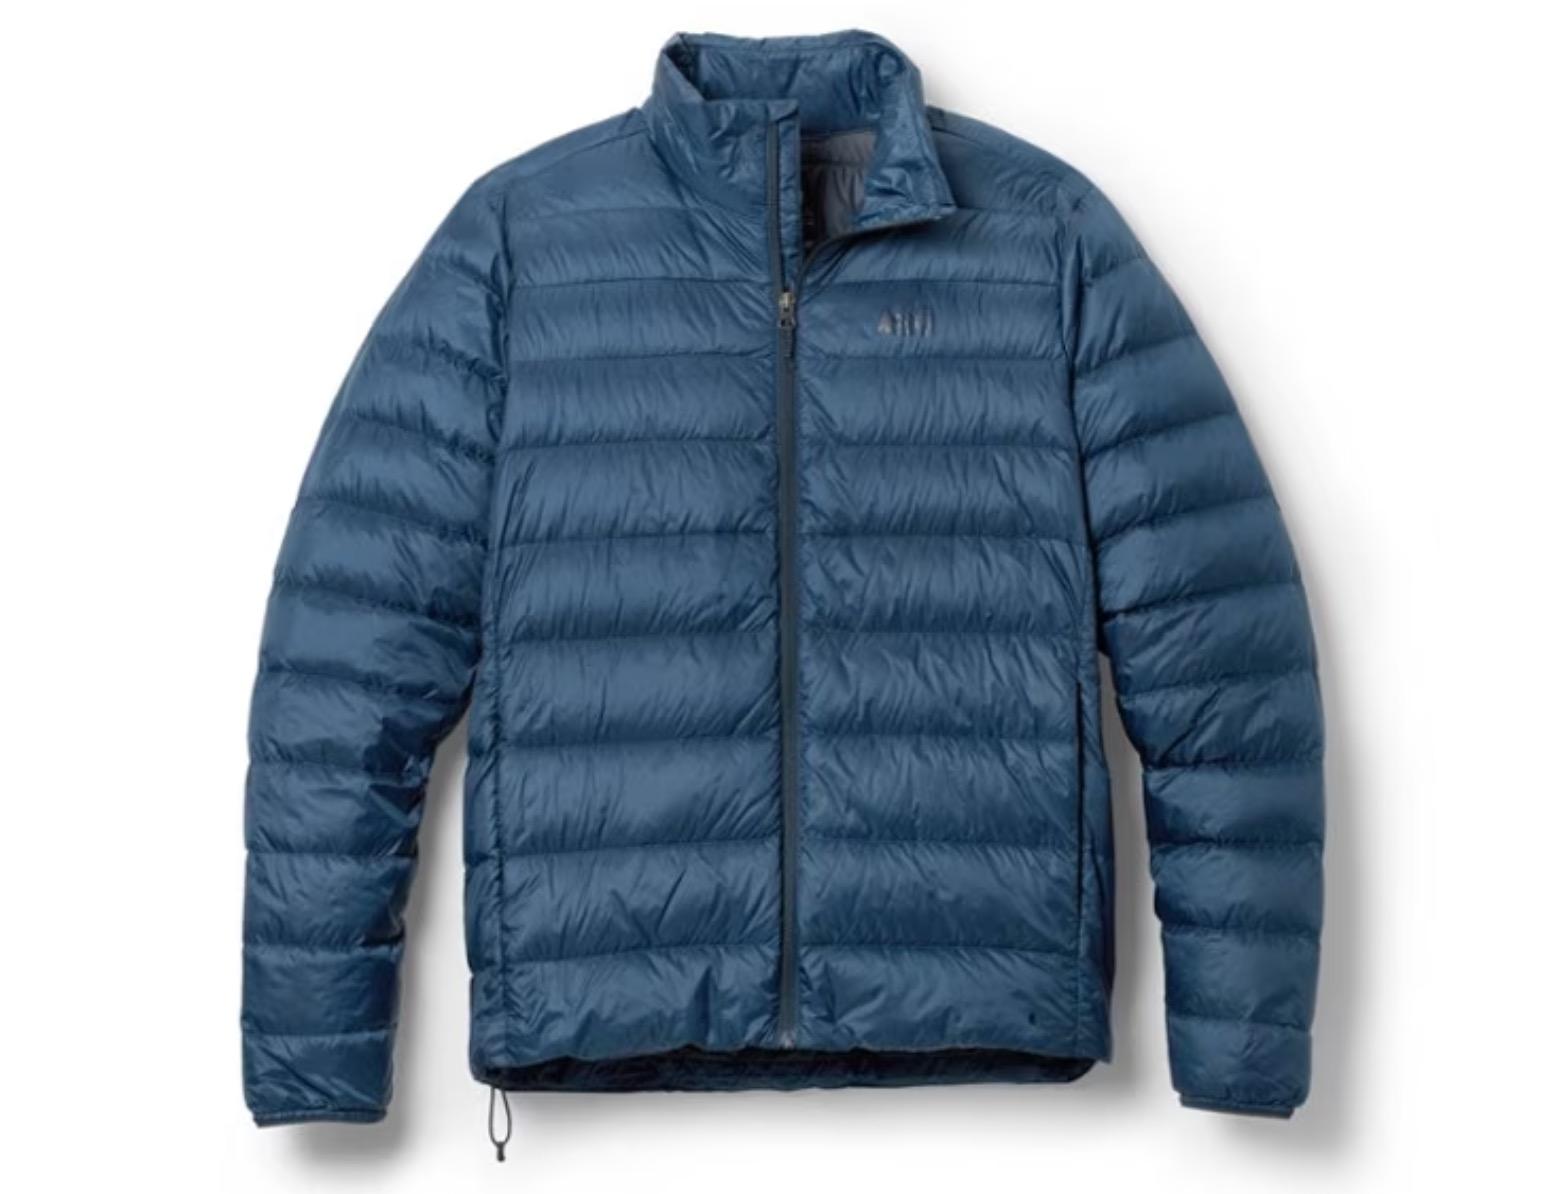 REI Co-op 650 Down Vest and Jacket for $49.89